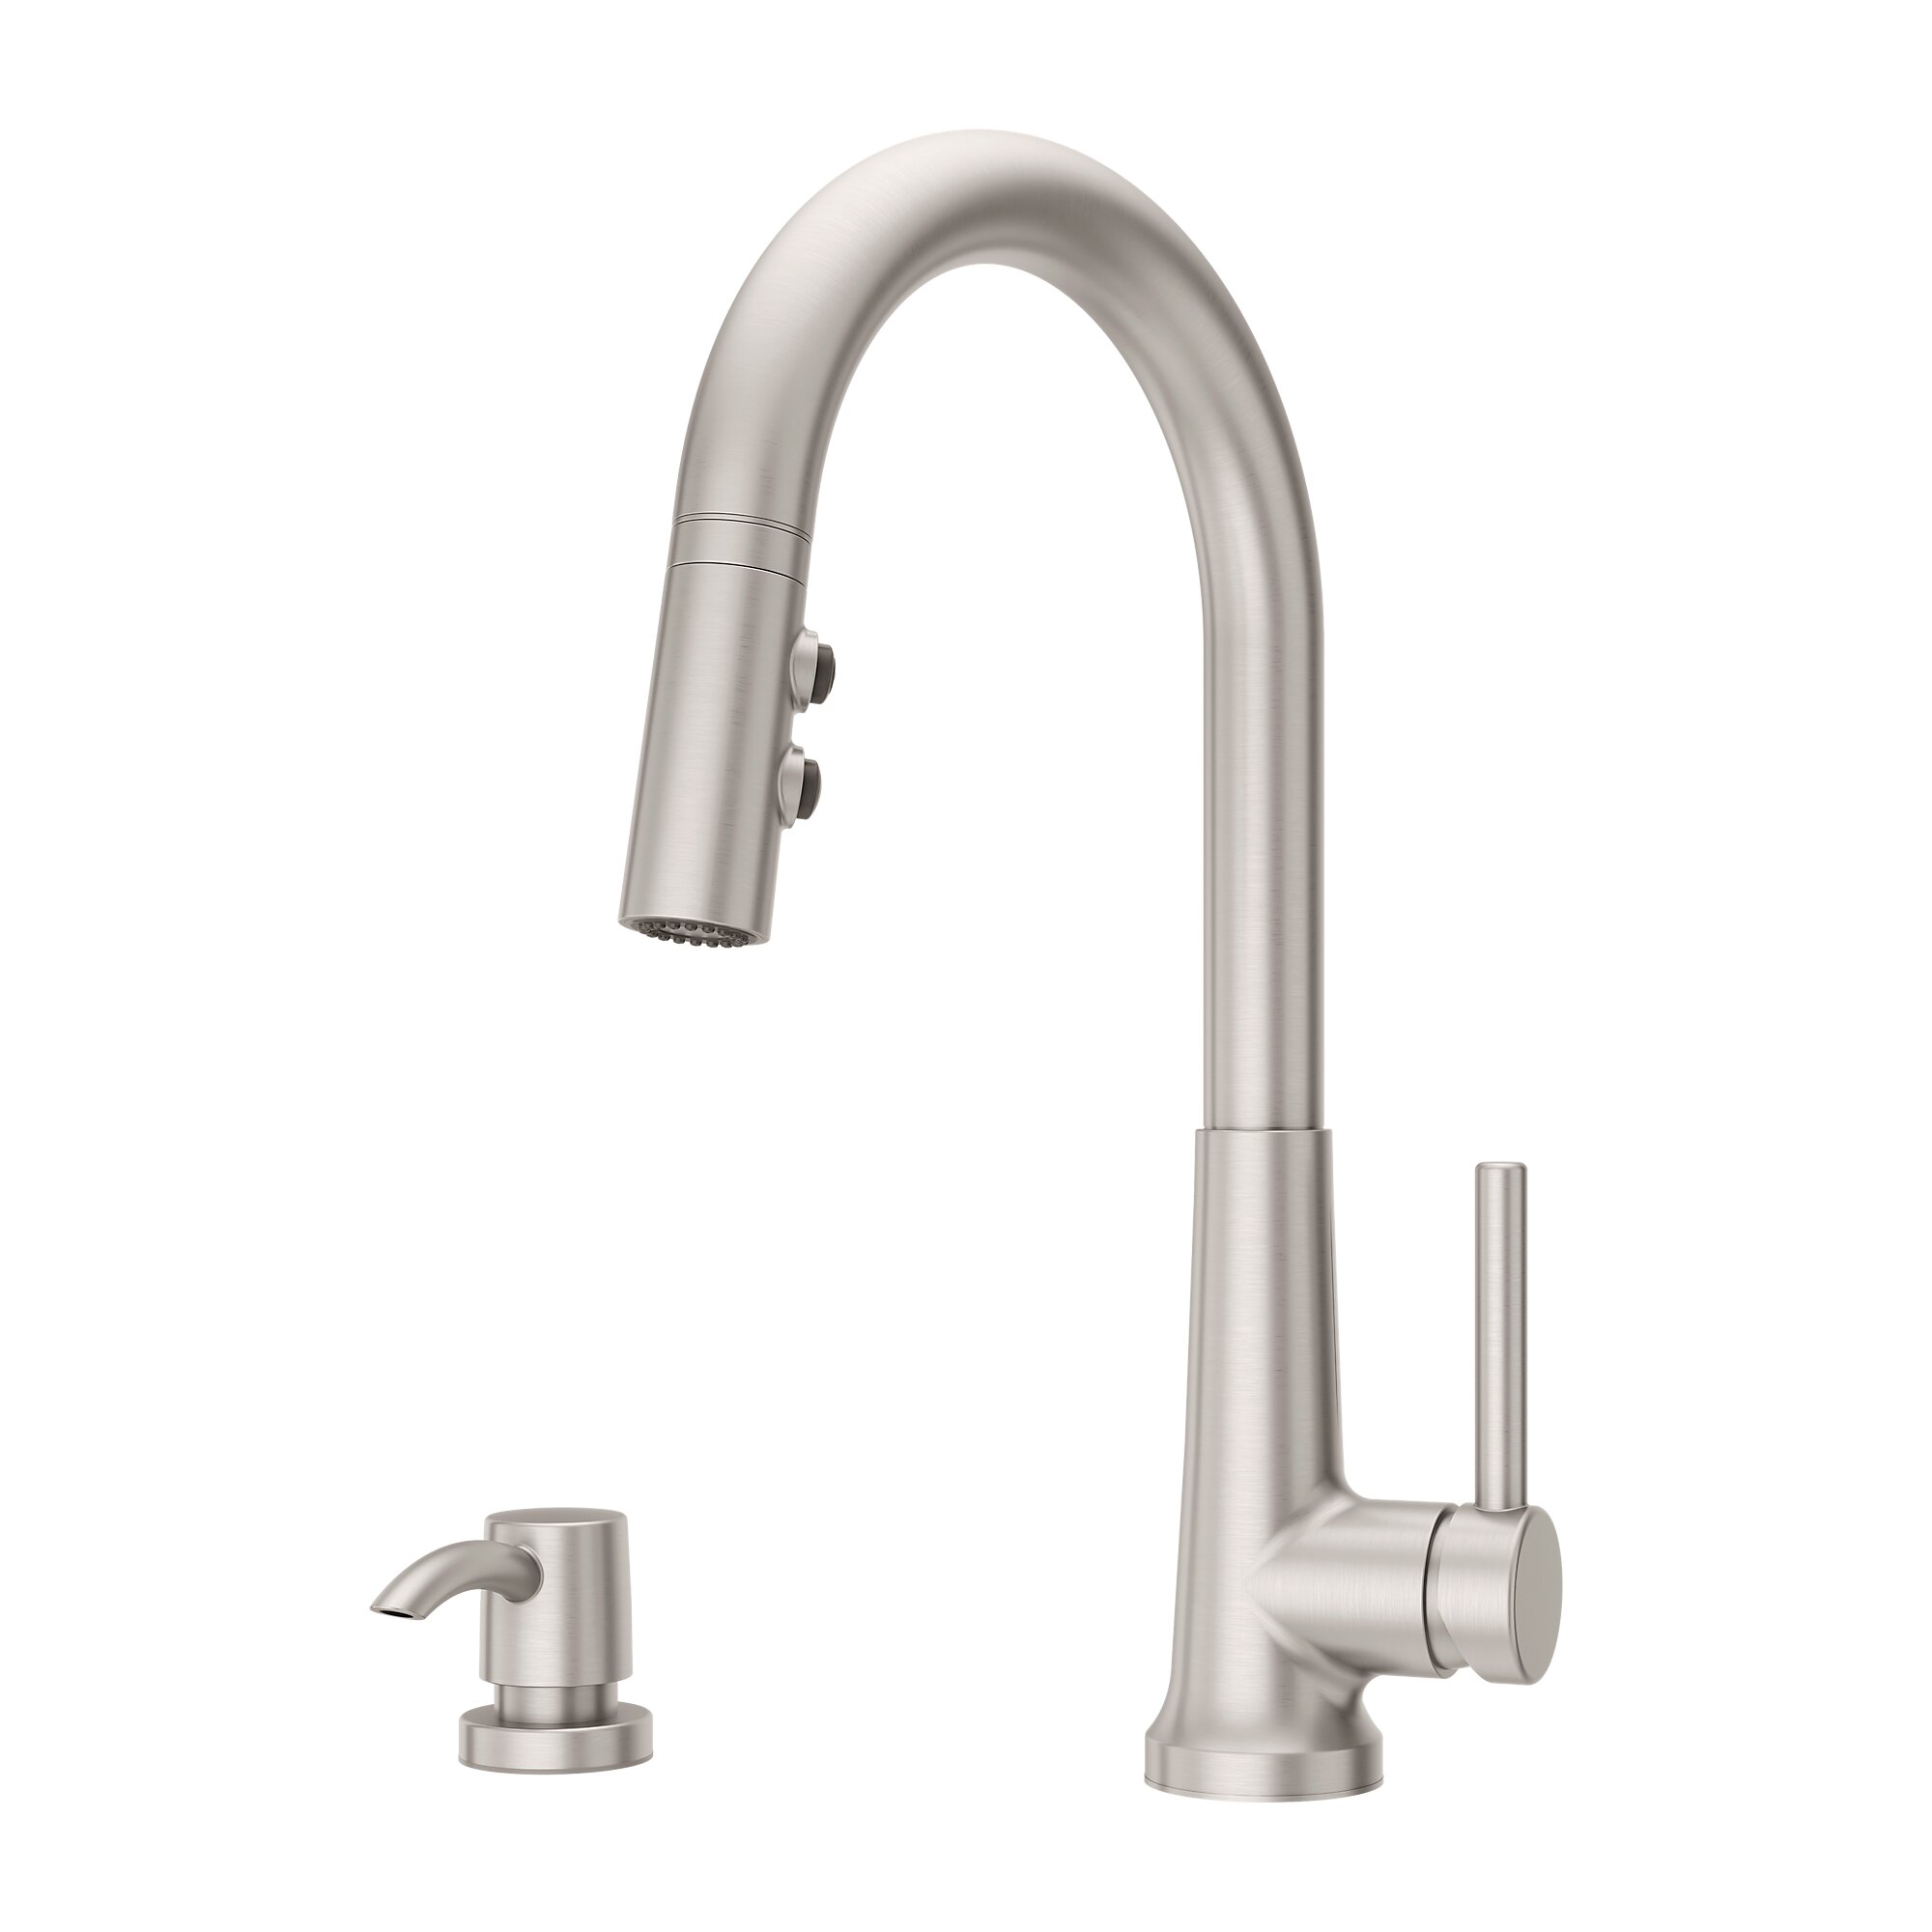 PFISTER F-529-7CEGS CRETE 15 3/8 INCH SINGLE LEVER HANDLE DECK MOUNT PULL-DOWN KITCHEN FAUCET WITH SOAP DISPENSER - SPOT DEFENSE STAINLESS STEEL